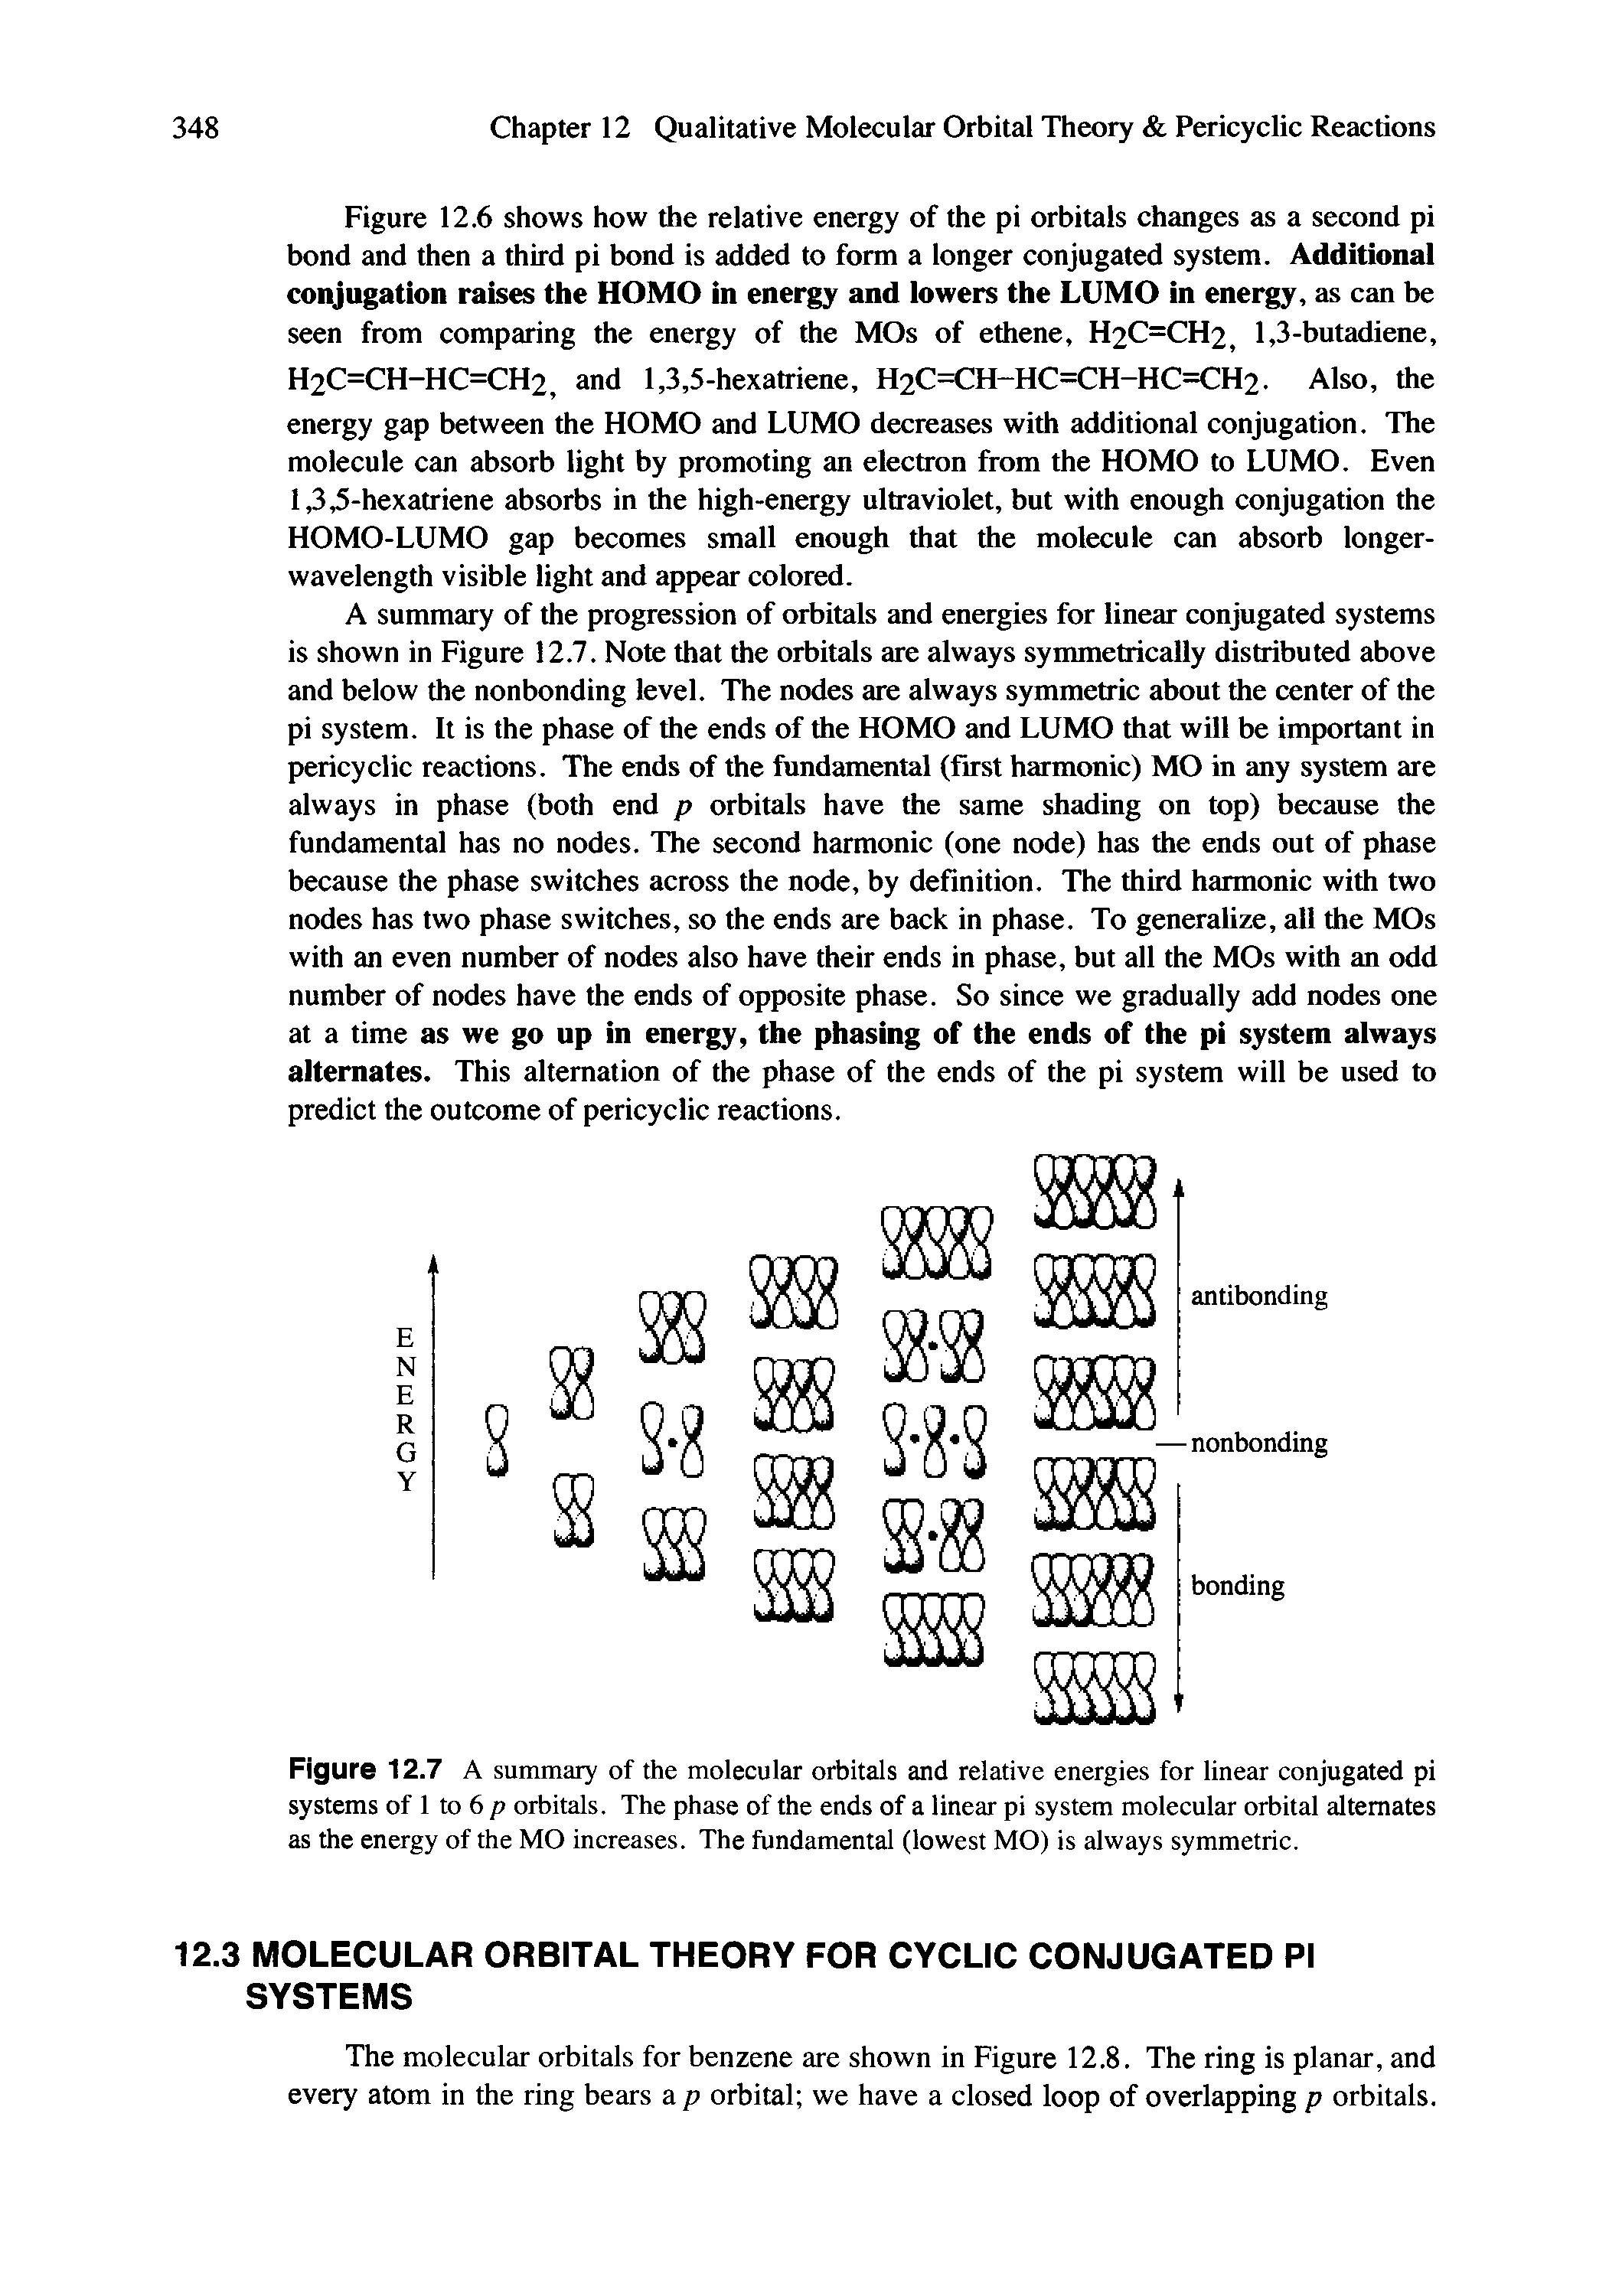 Figure 12.7 A summary of the molecular orbitals and relative energies for linear conjugated pi systems of 1 to 6 p orbitals. The phase of the ends of a linear pi system molecular orbital alternates as the energy of the MO increases. The fundamentai (lowest MO) is always symmetric.